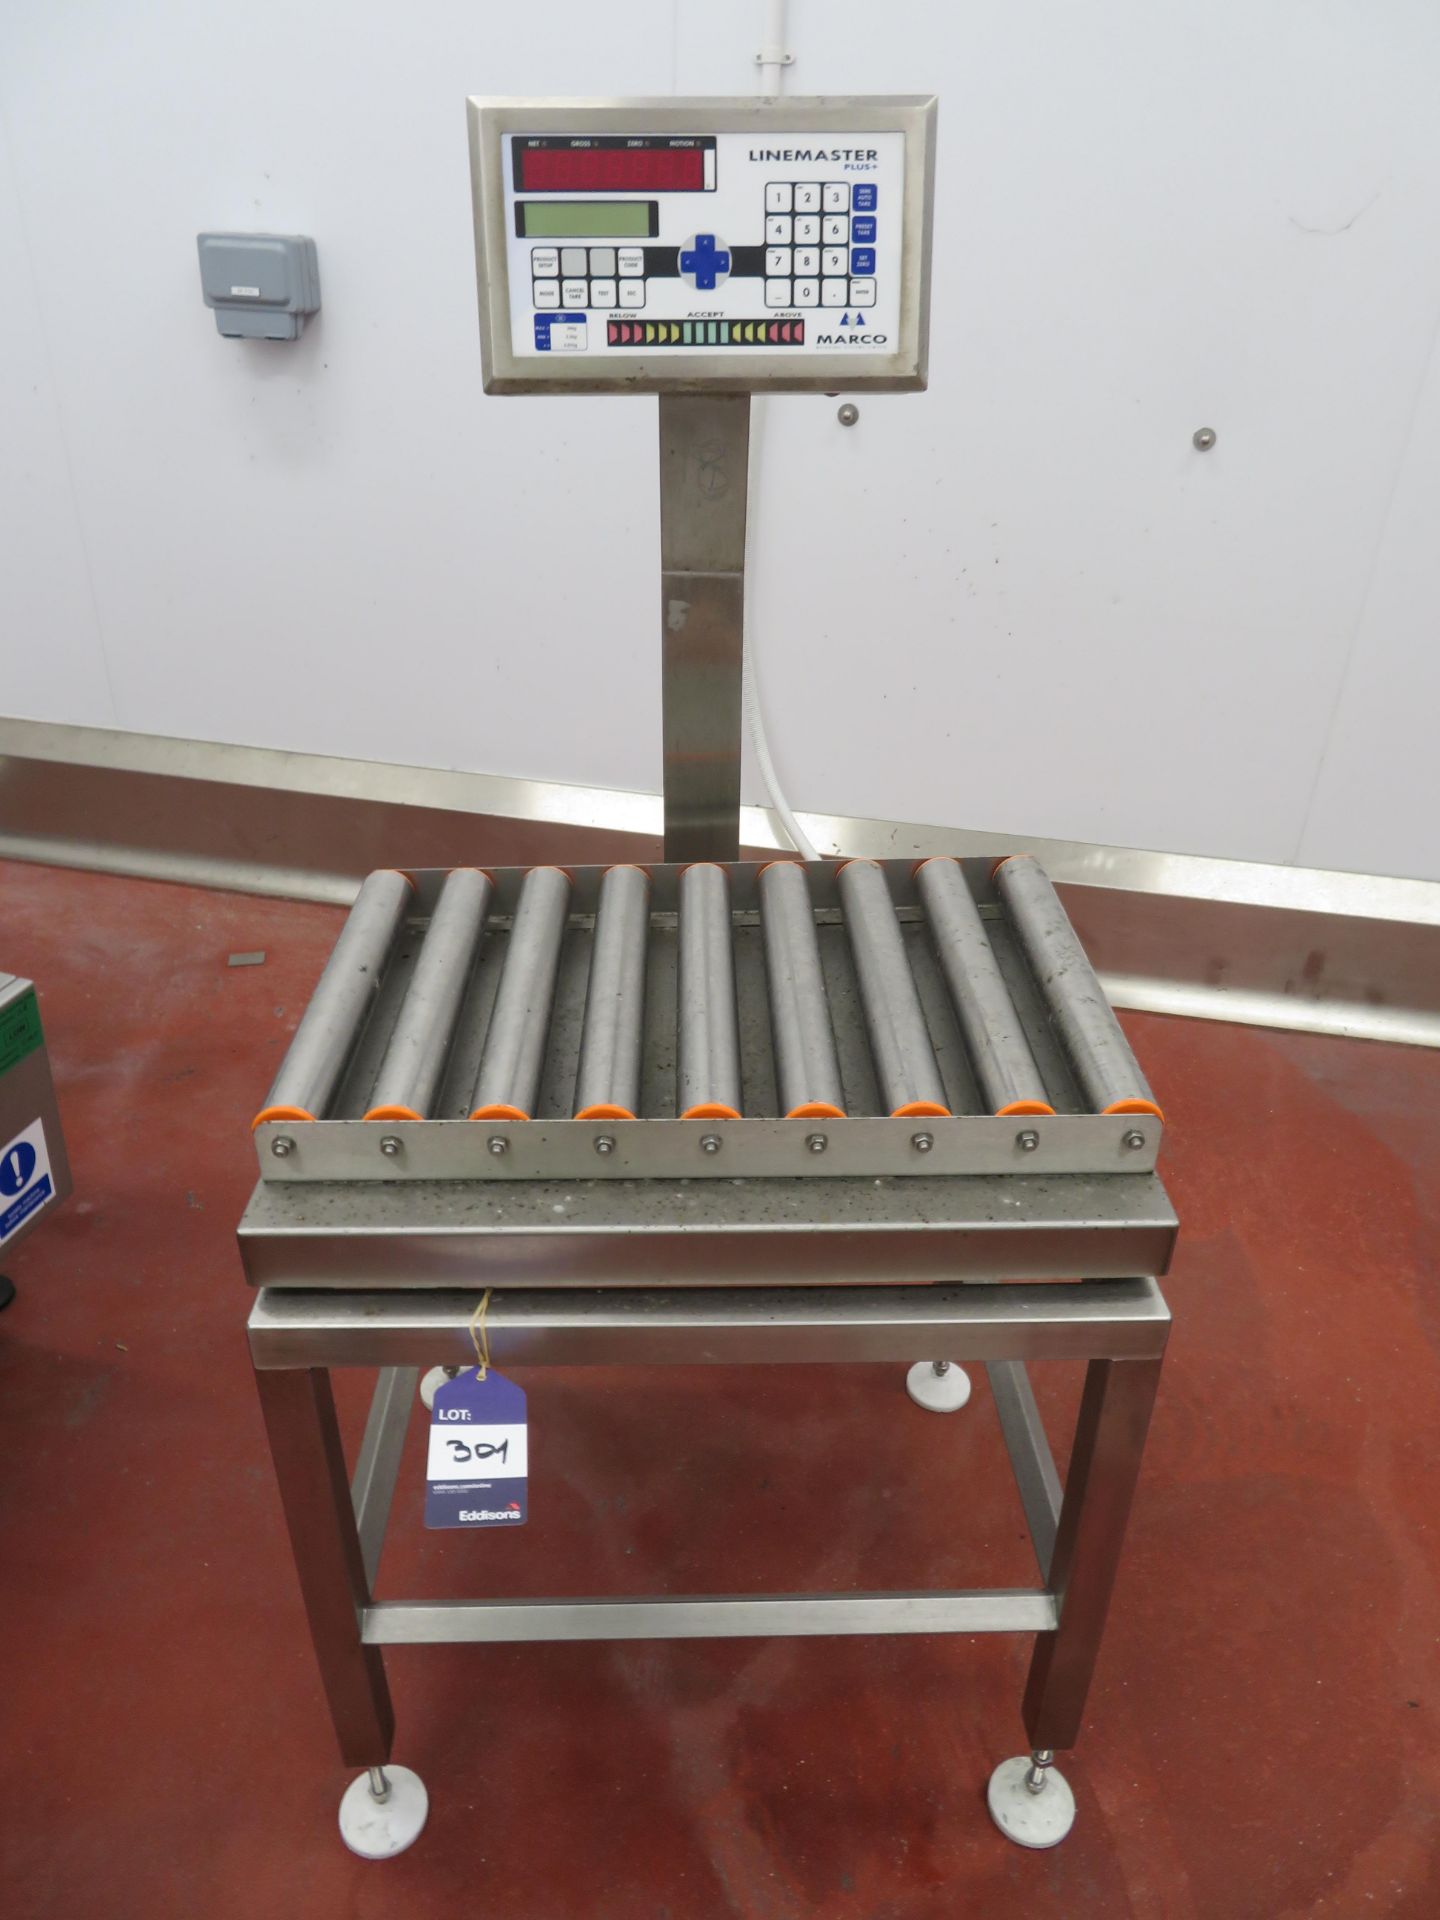 Marco Weigh Systems Linemaster plus